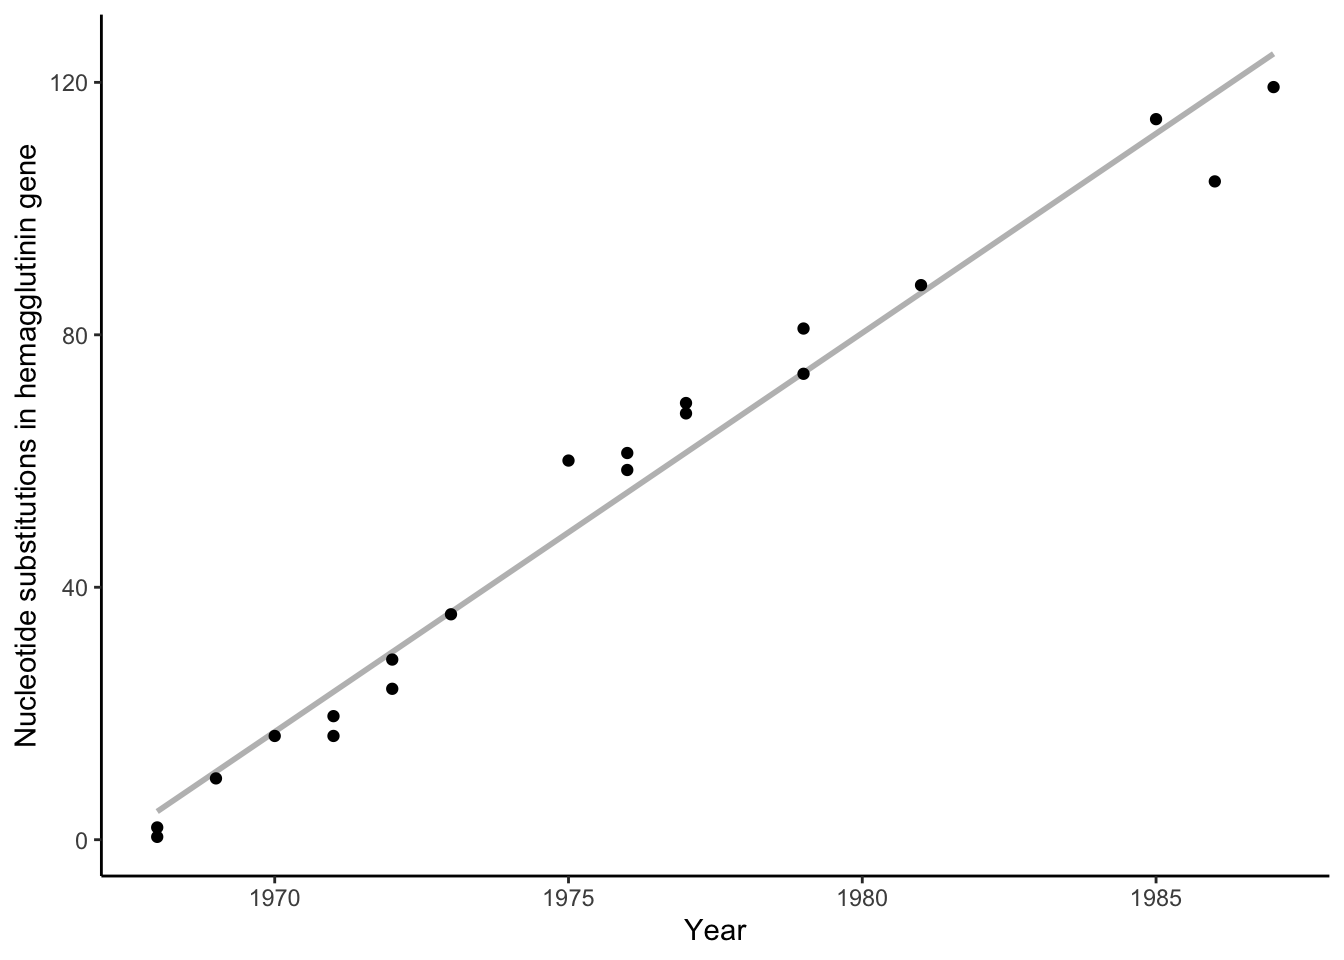 Accumulation of nucleotide substitutions in the hemagglutinin gene of the influenza A virus from 1968-1987. This time period is equivalent to about 20 million years of mammalian evolution. [Data](data/7_influenza.csv) from Fitch et al. (1991).